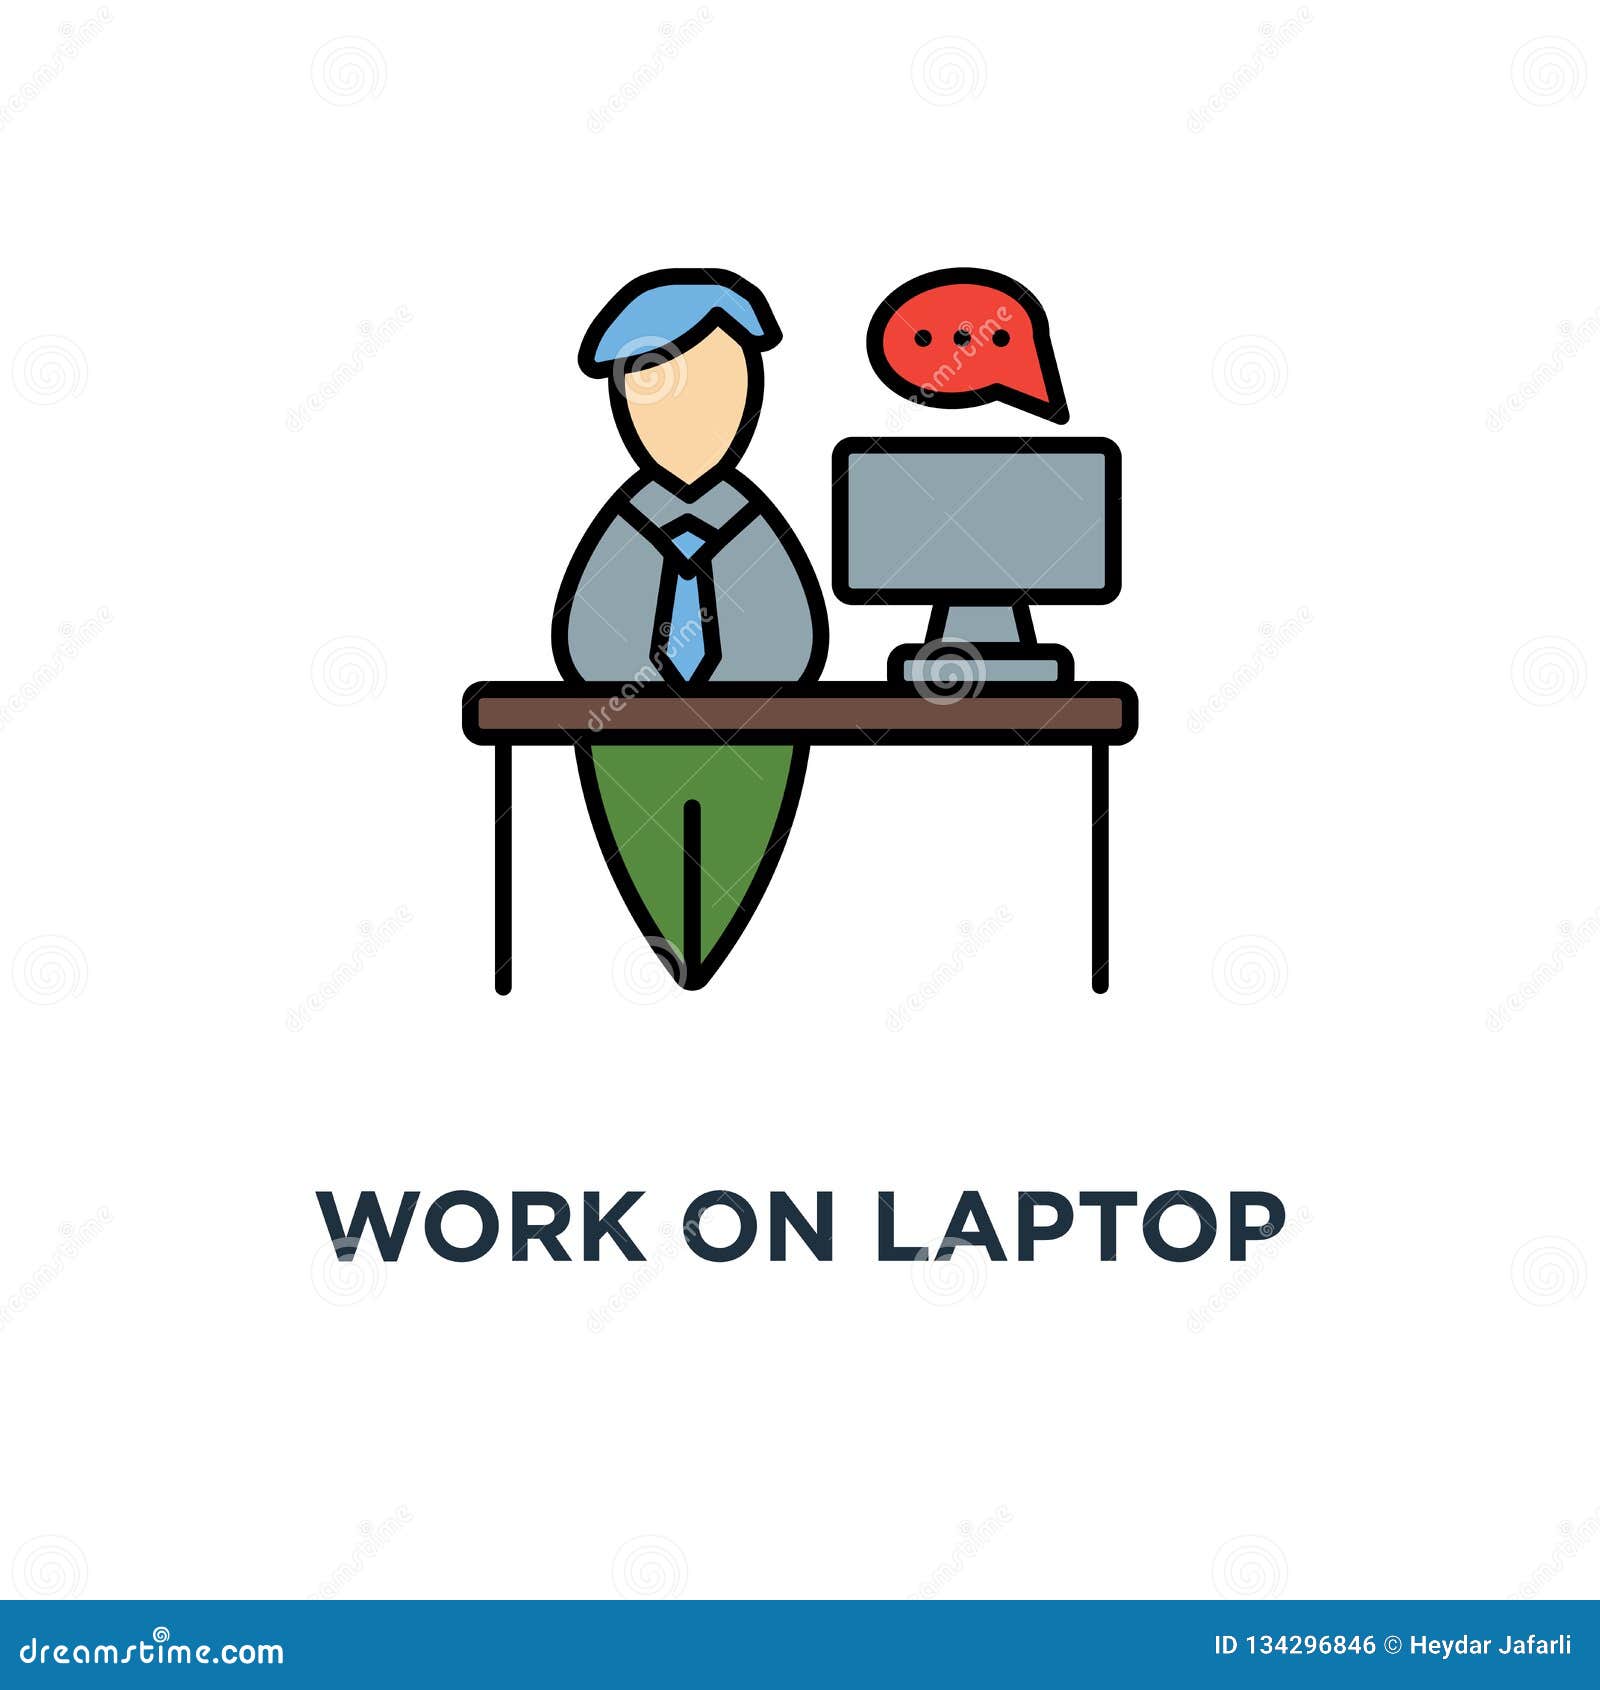 Work On Laptop Icon Workplace Cute Cartoon Adult Man Working On Computer Freelancer Character Concept Symbol Design Supporter Stock Vector Illustration Of Desk Laptop